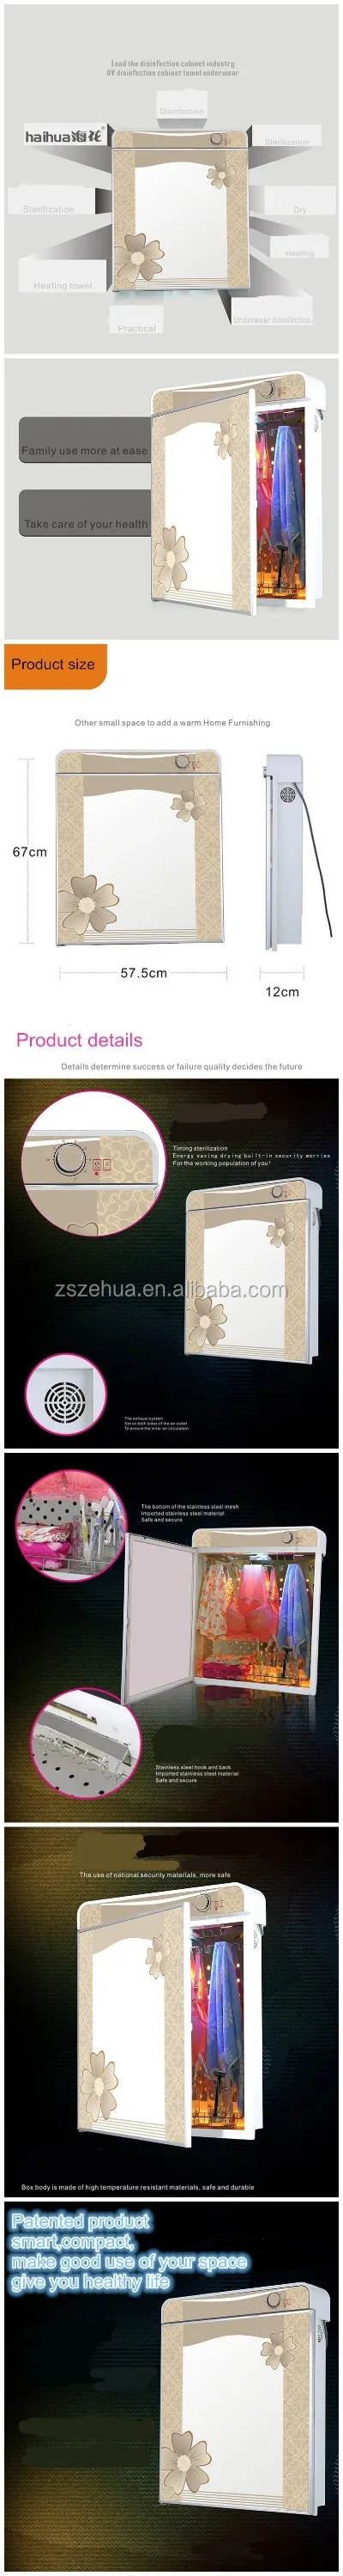 details for towel disinfection cabinet.jpg